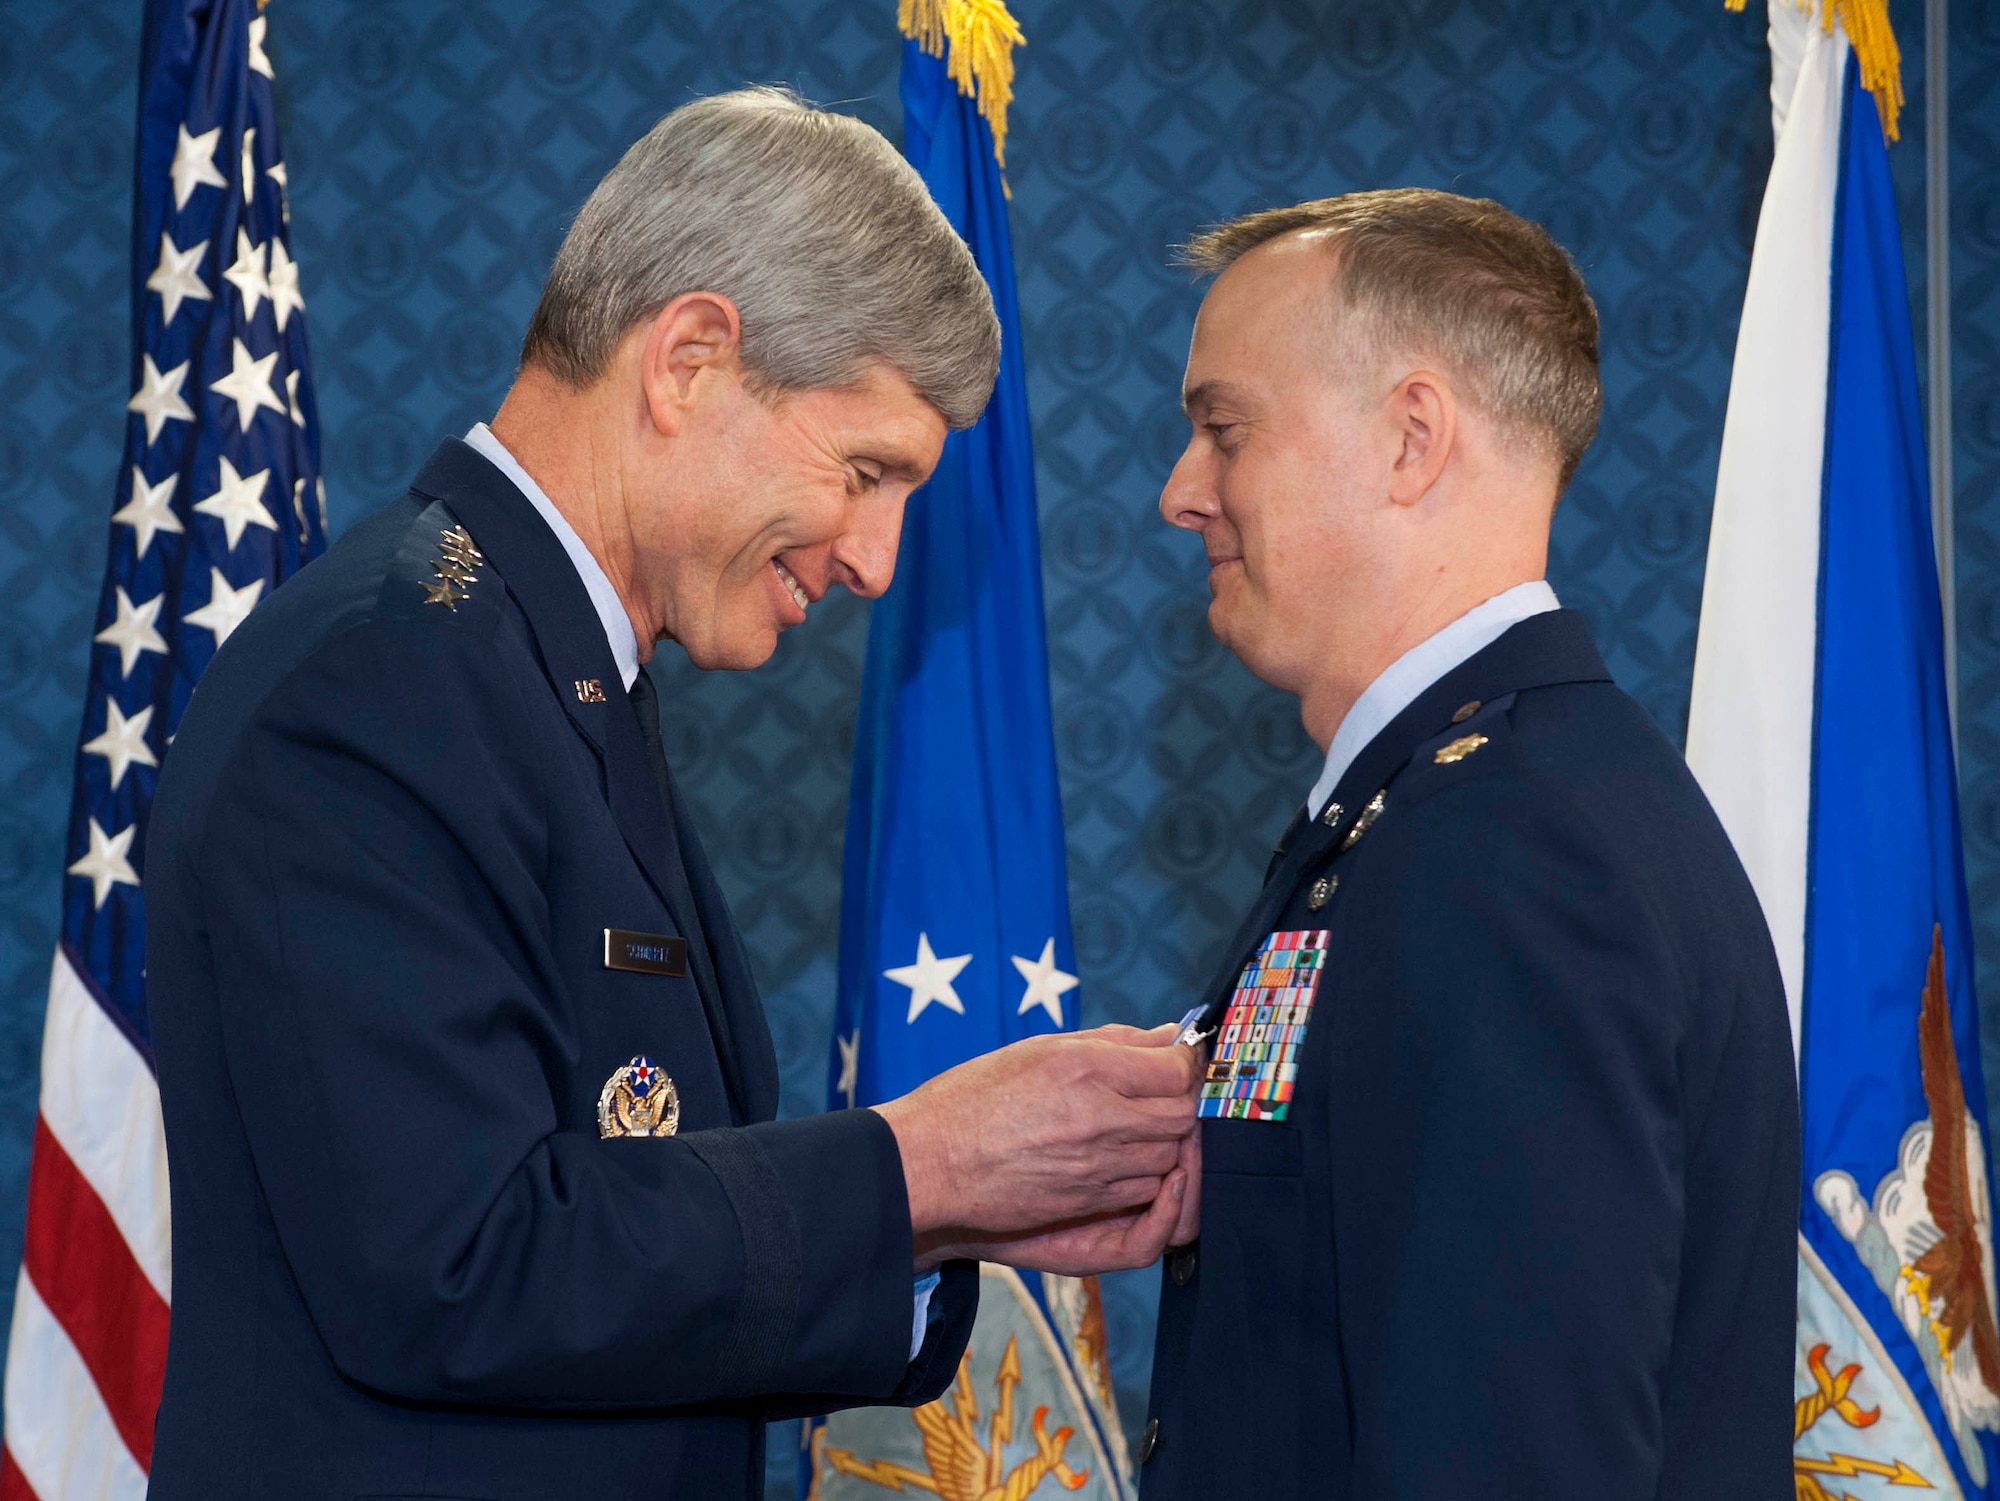 Air Force Chief of Staff Gen. Norton Schwartz (left) presents the first of two Distinguished Flying Cross with Valor medals to Maj. John Creel during a ceremony in the Pentagon on May 18, 2012. (U.S. Air Force photo/Jim Varhegyi)